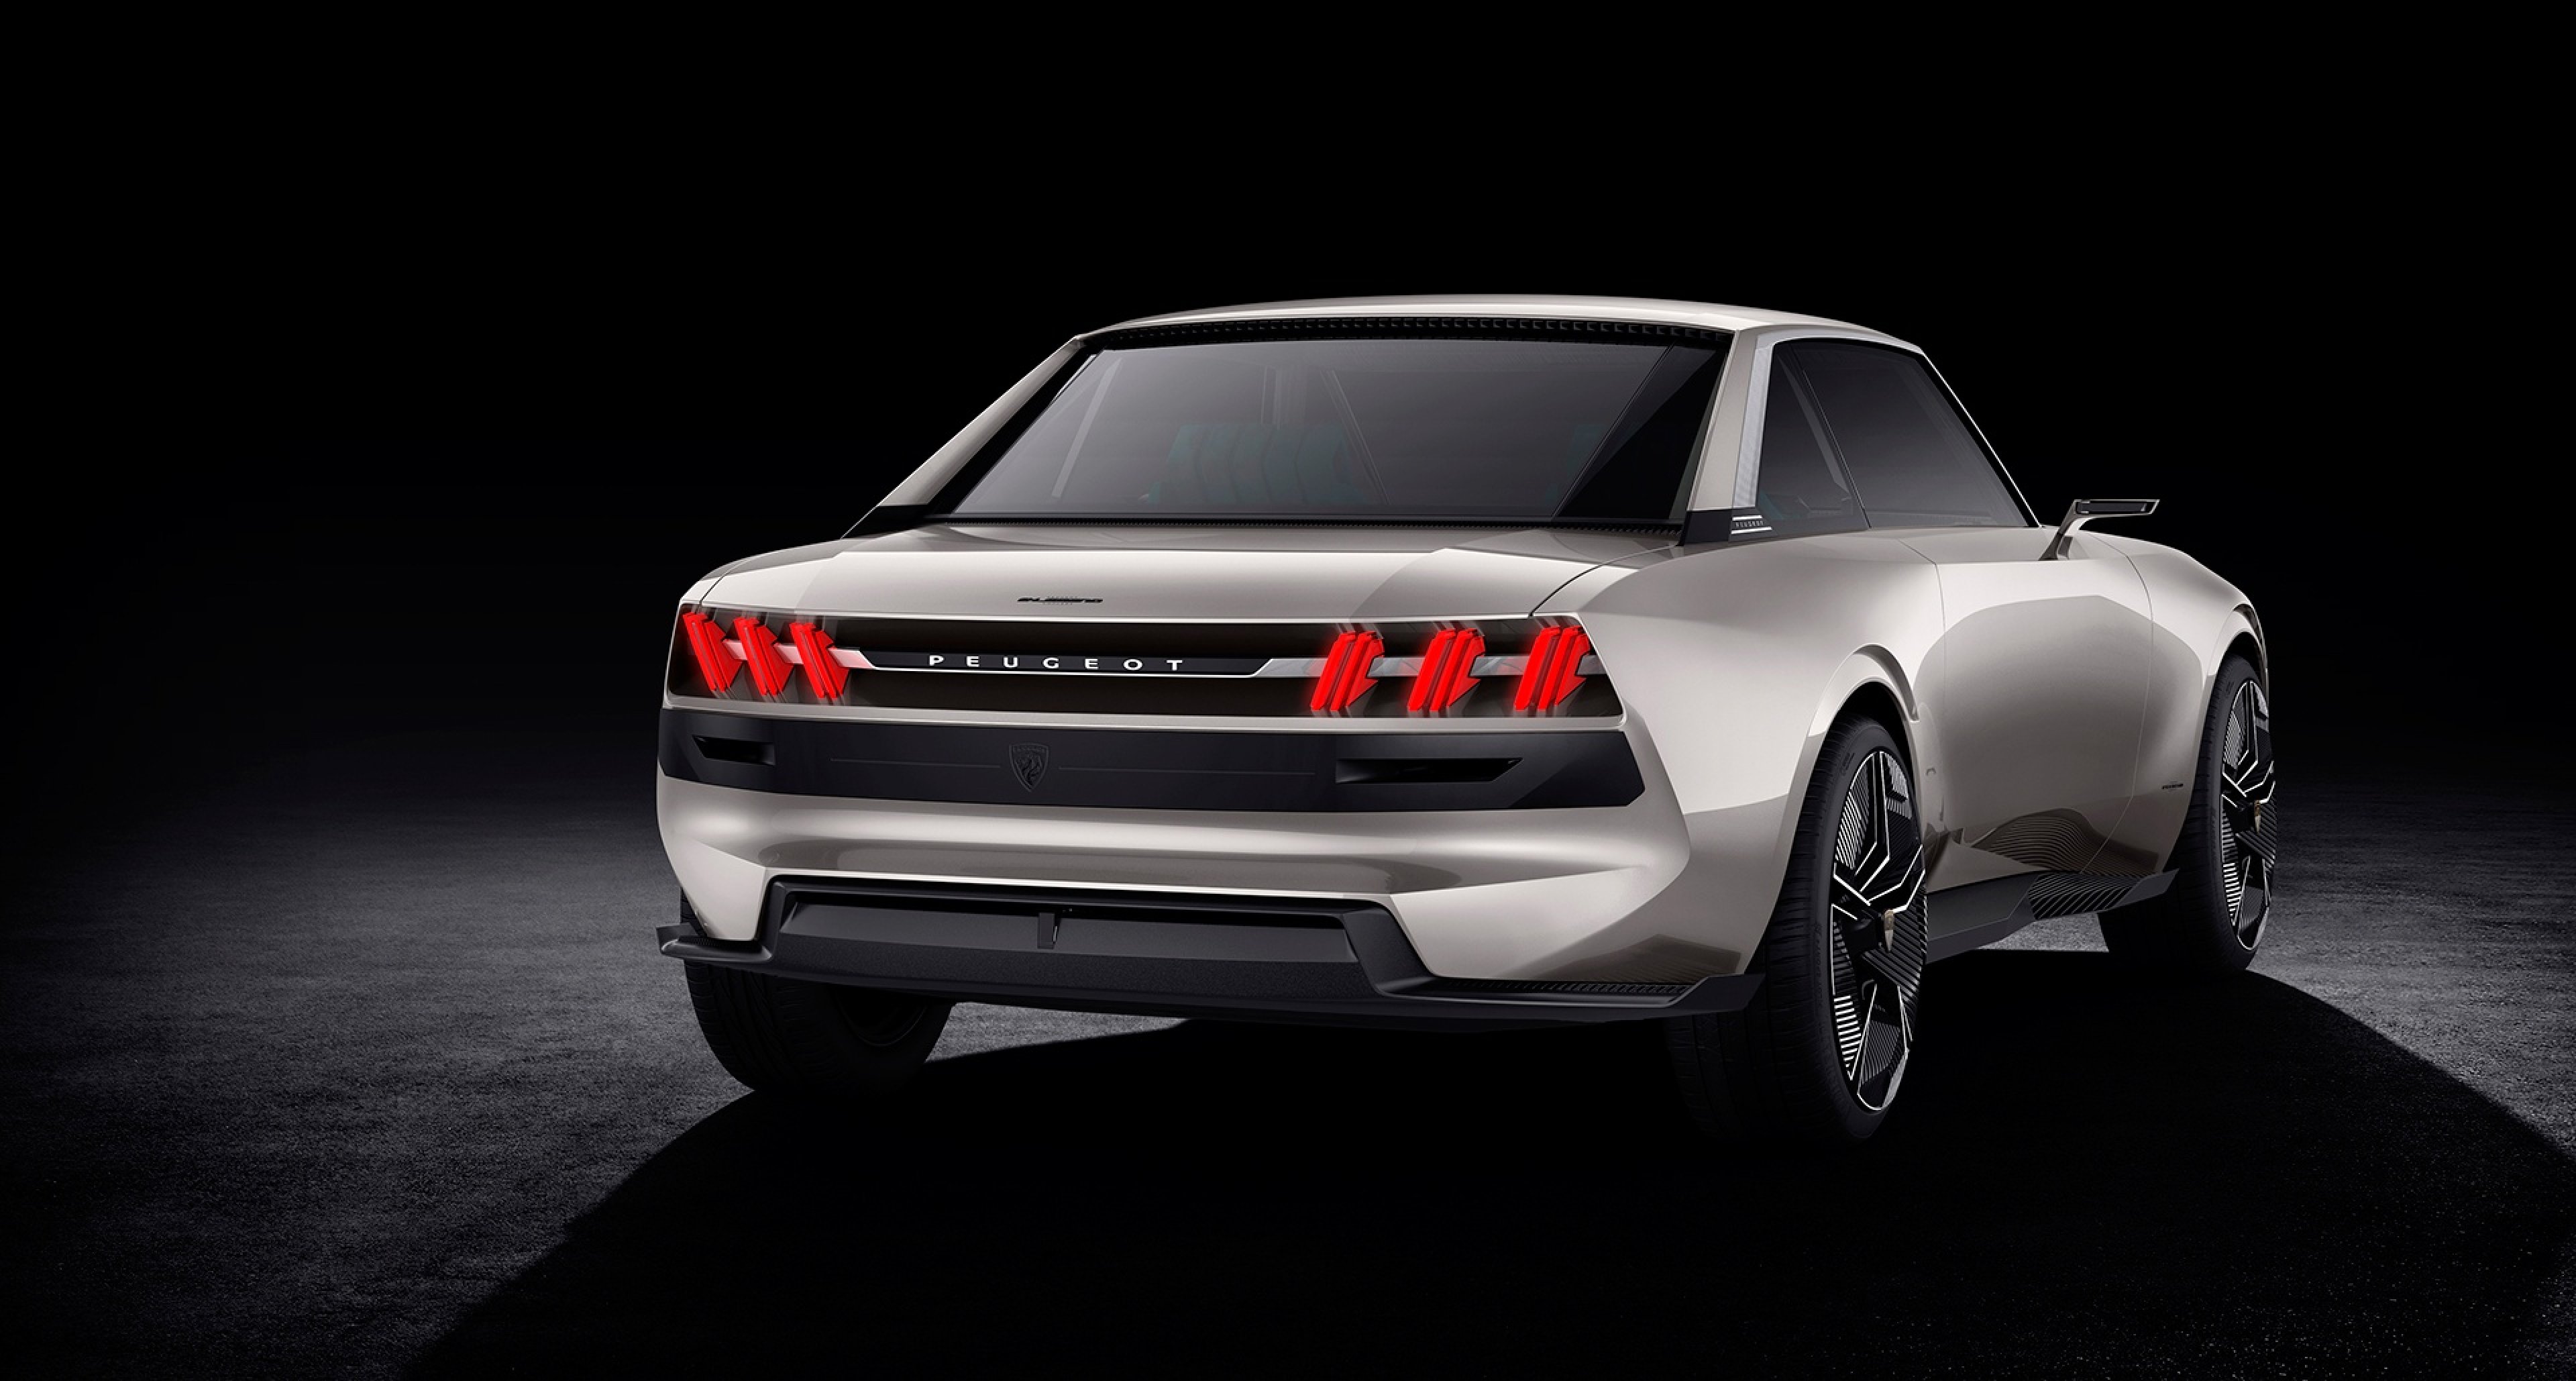 The Peugeot 504 reincarnated as the allelectric eLegend concept